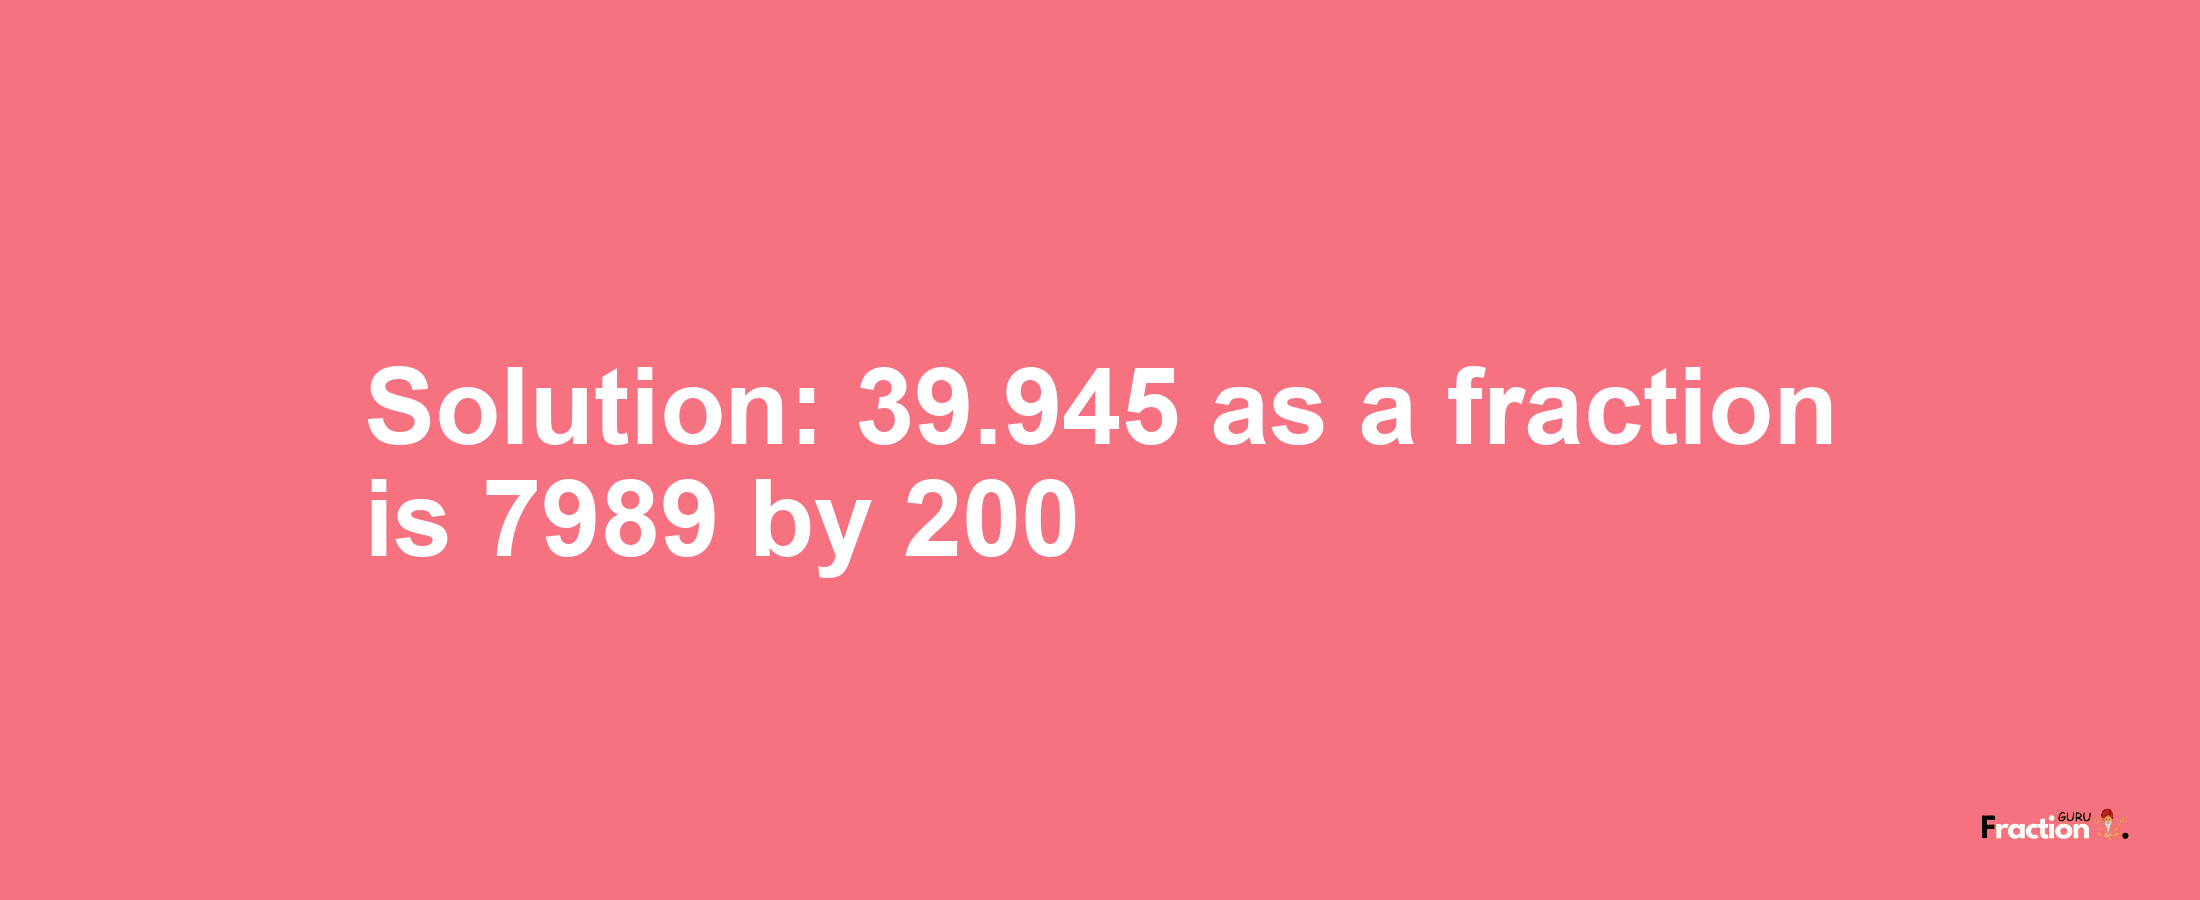 Solution:39.945 as a fraction is 7989/200